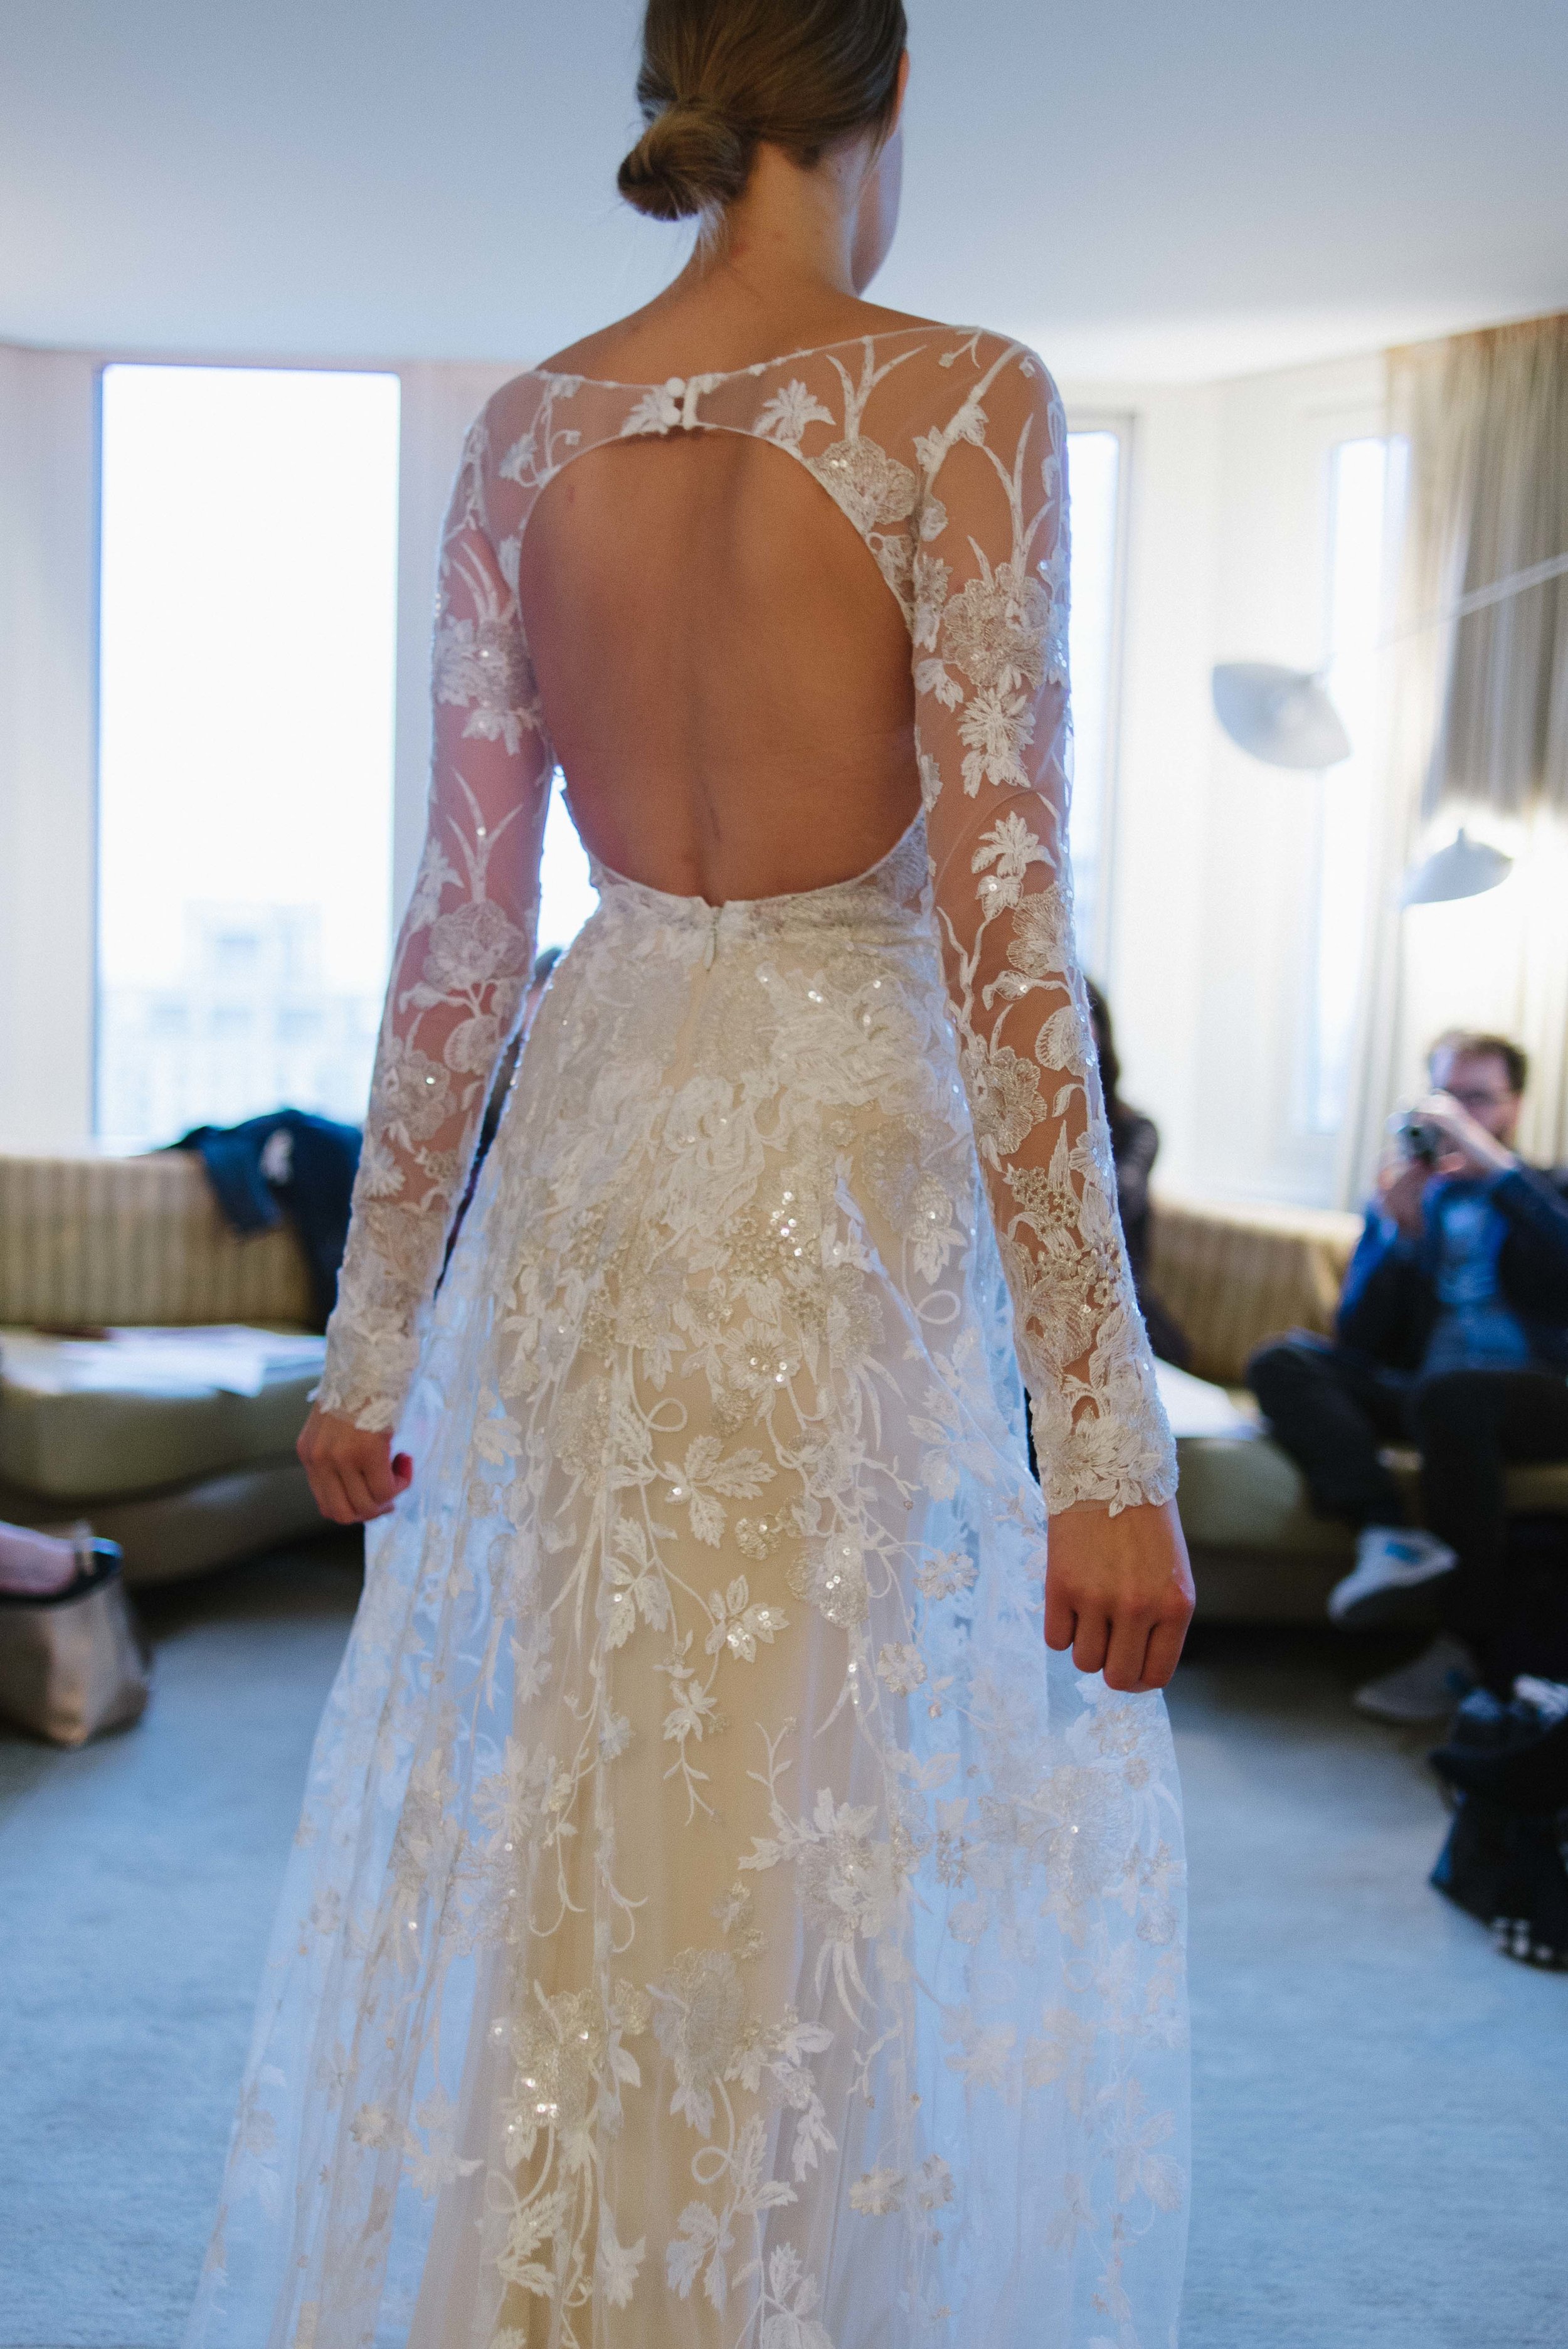  New York Bridal Fashion Week 2016 | Anne Barge Couture Collection | Available at Little White Dress Bridal Shop in Denver 